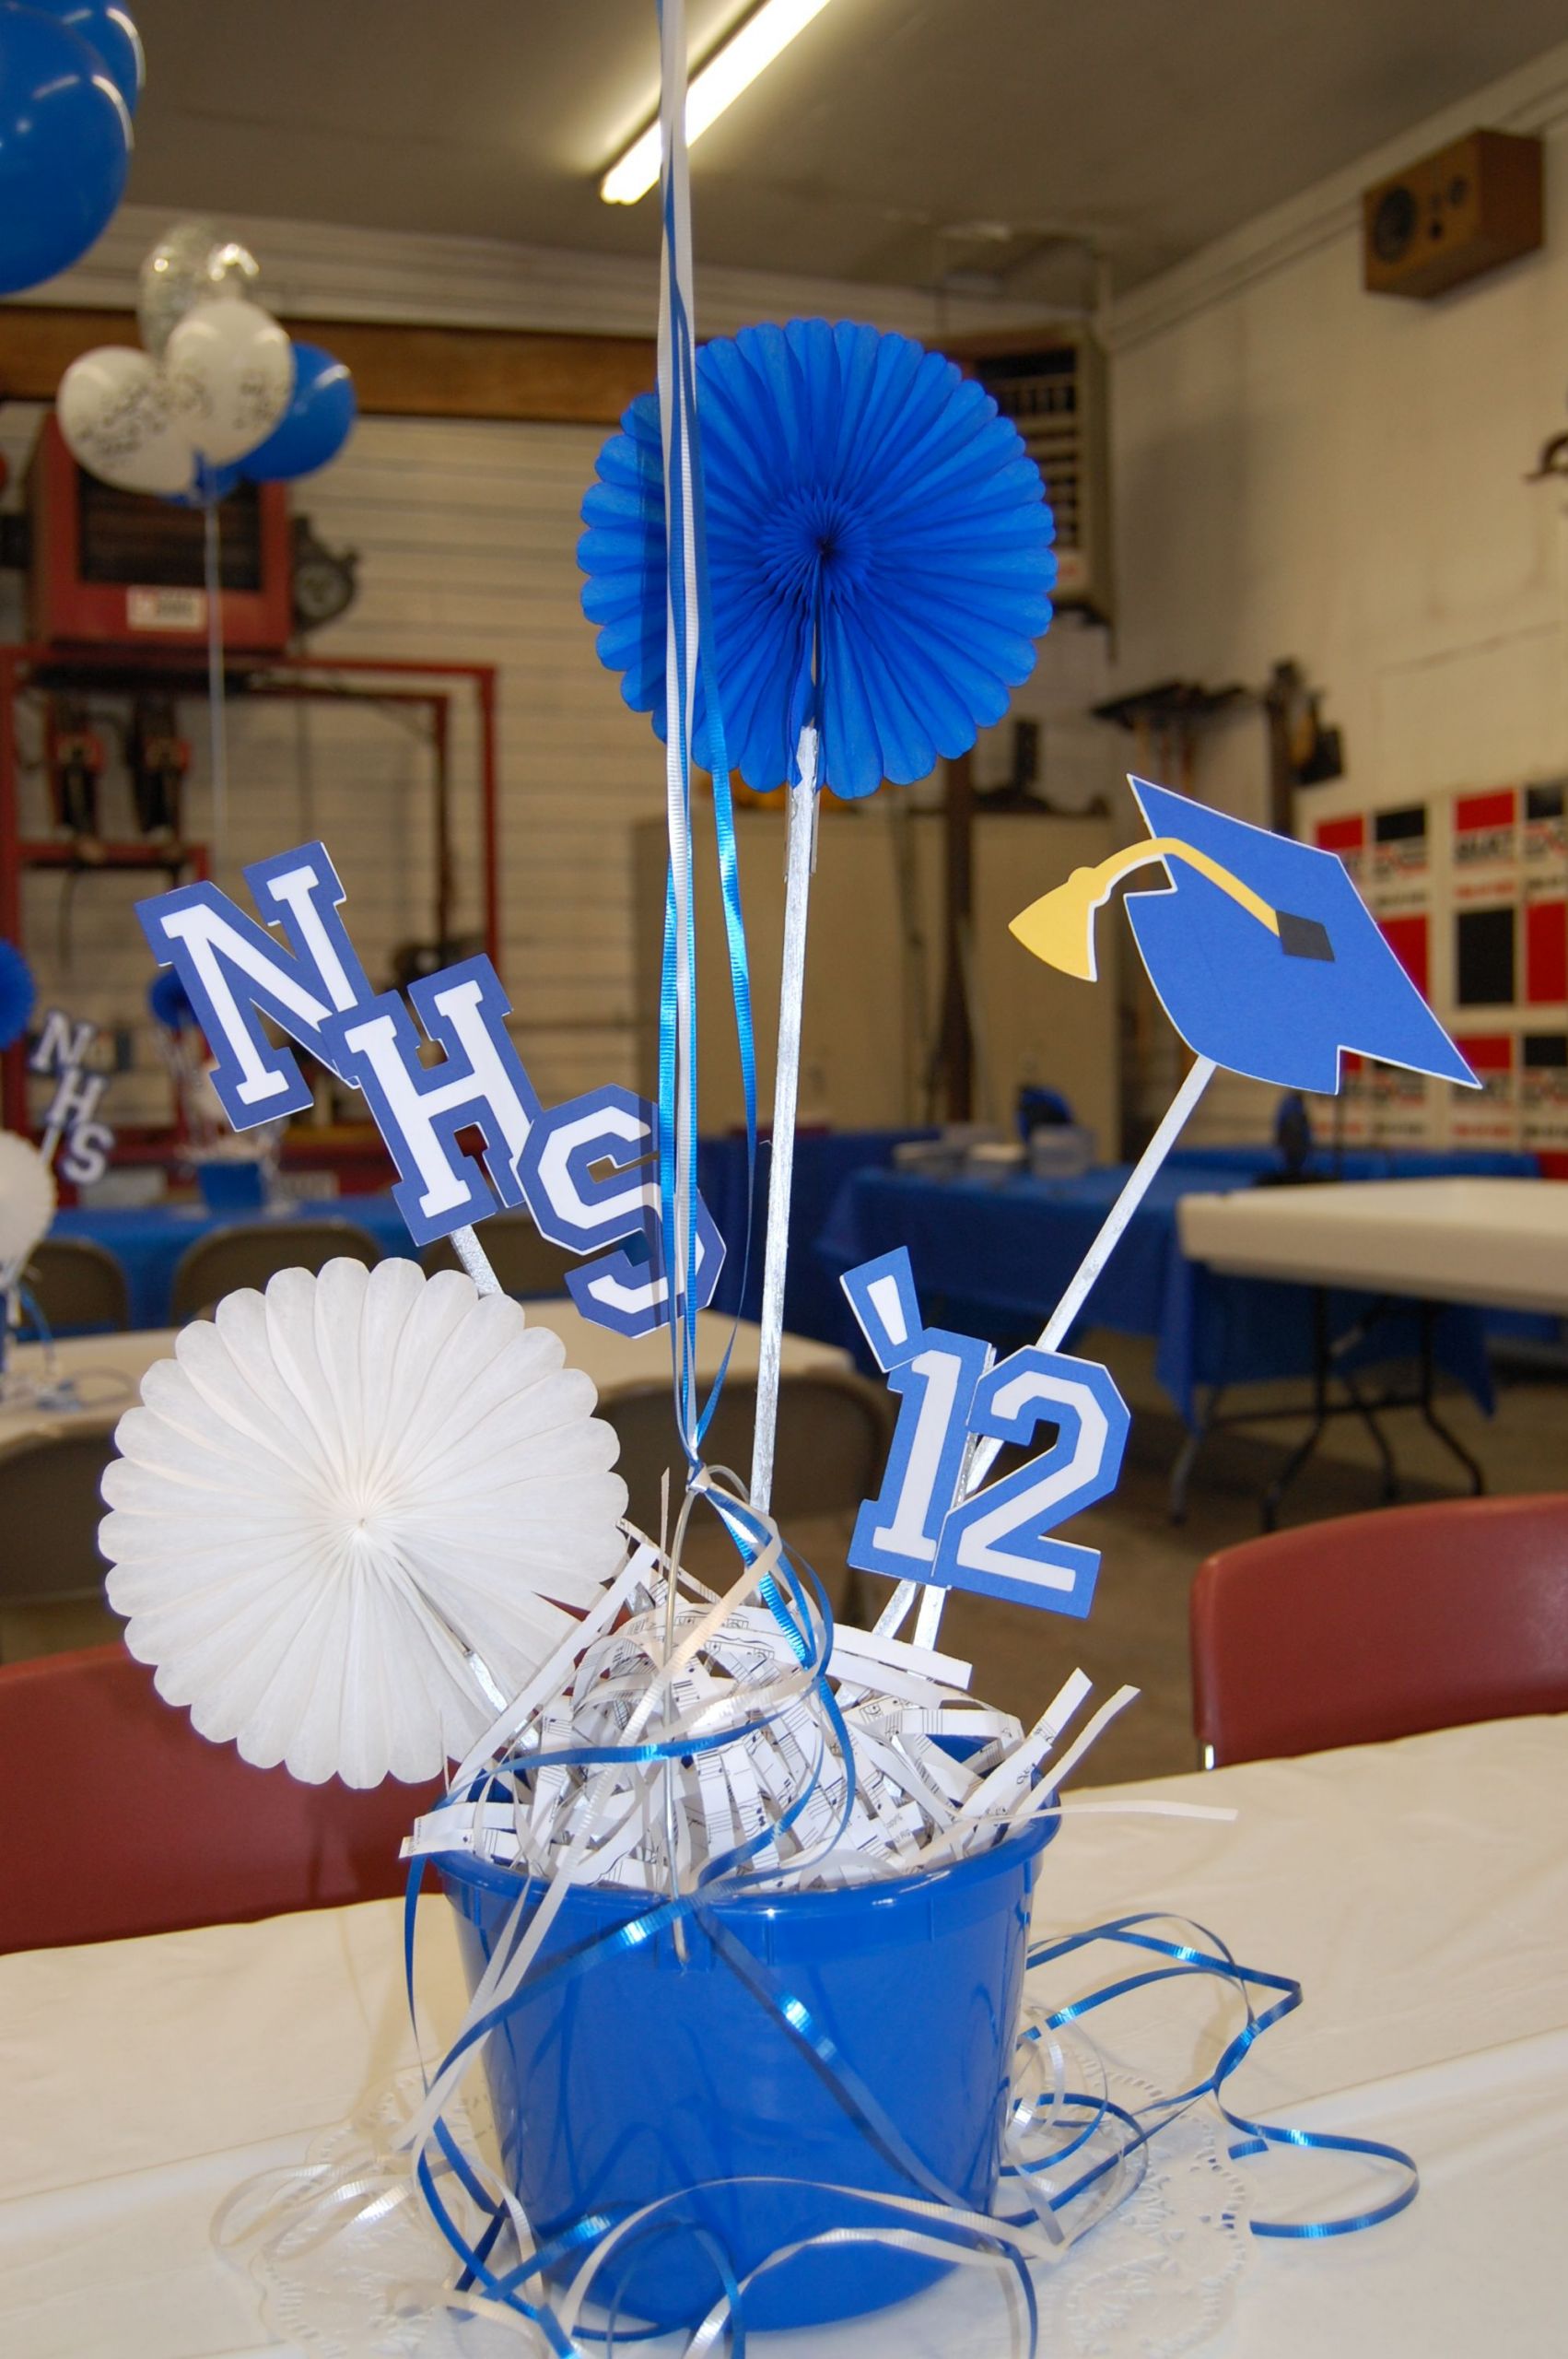 Graduation Party Table Centerpiece Ideas
 Easy centerpieces Grad time will be here soon